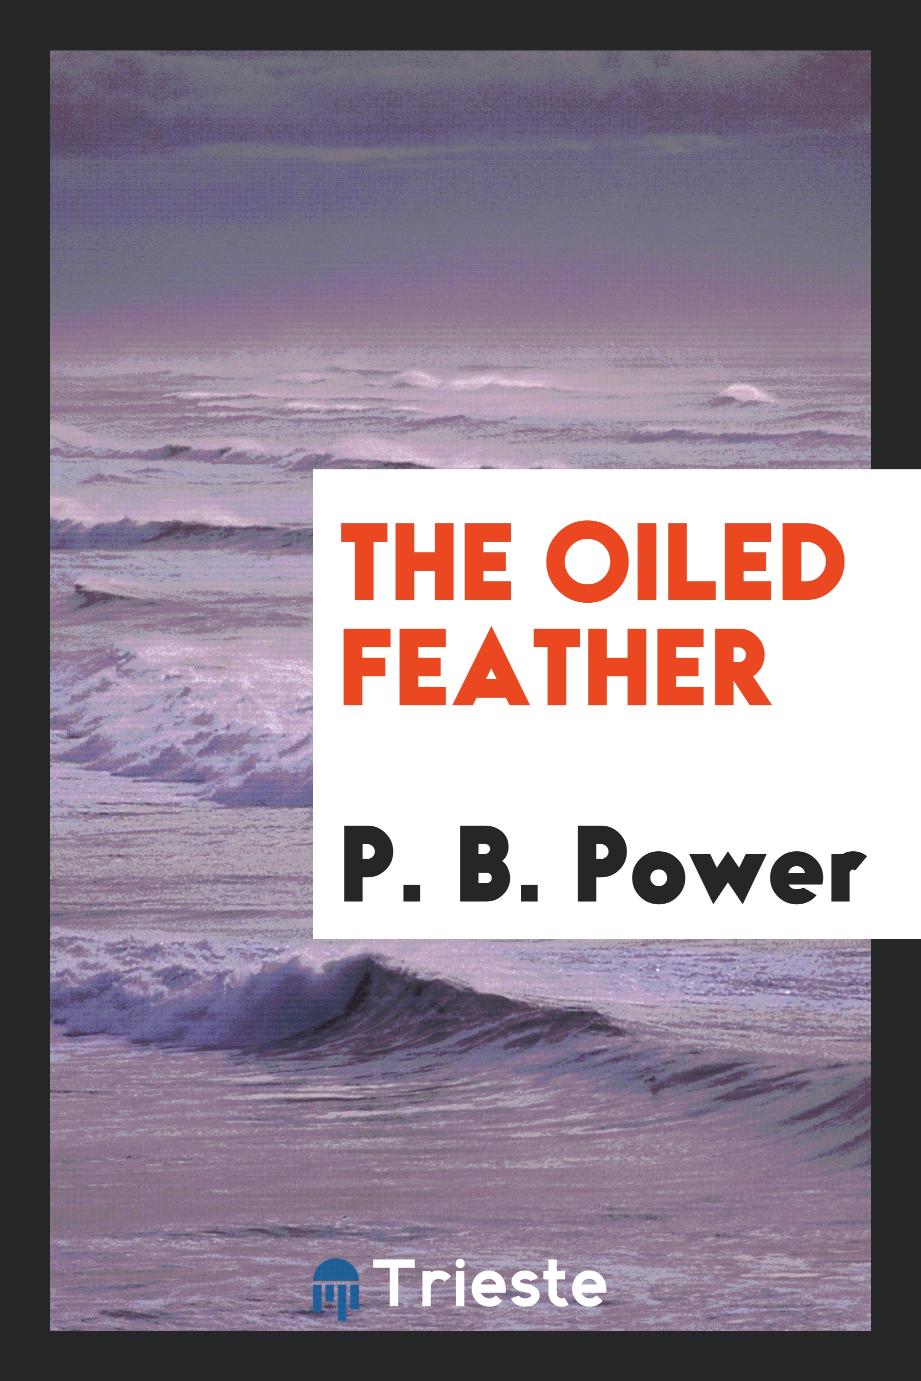 The oiled feather